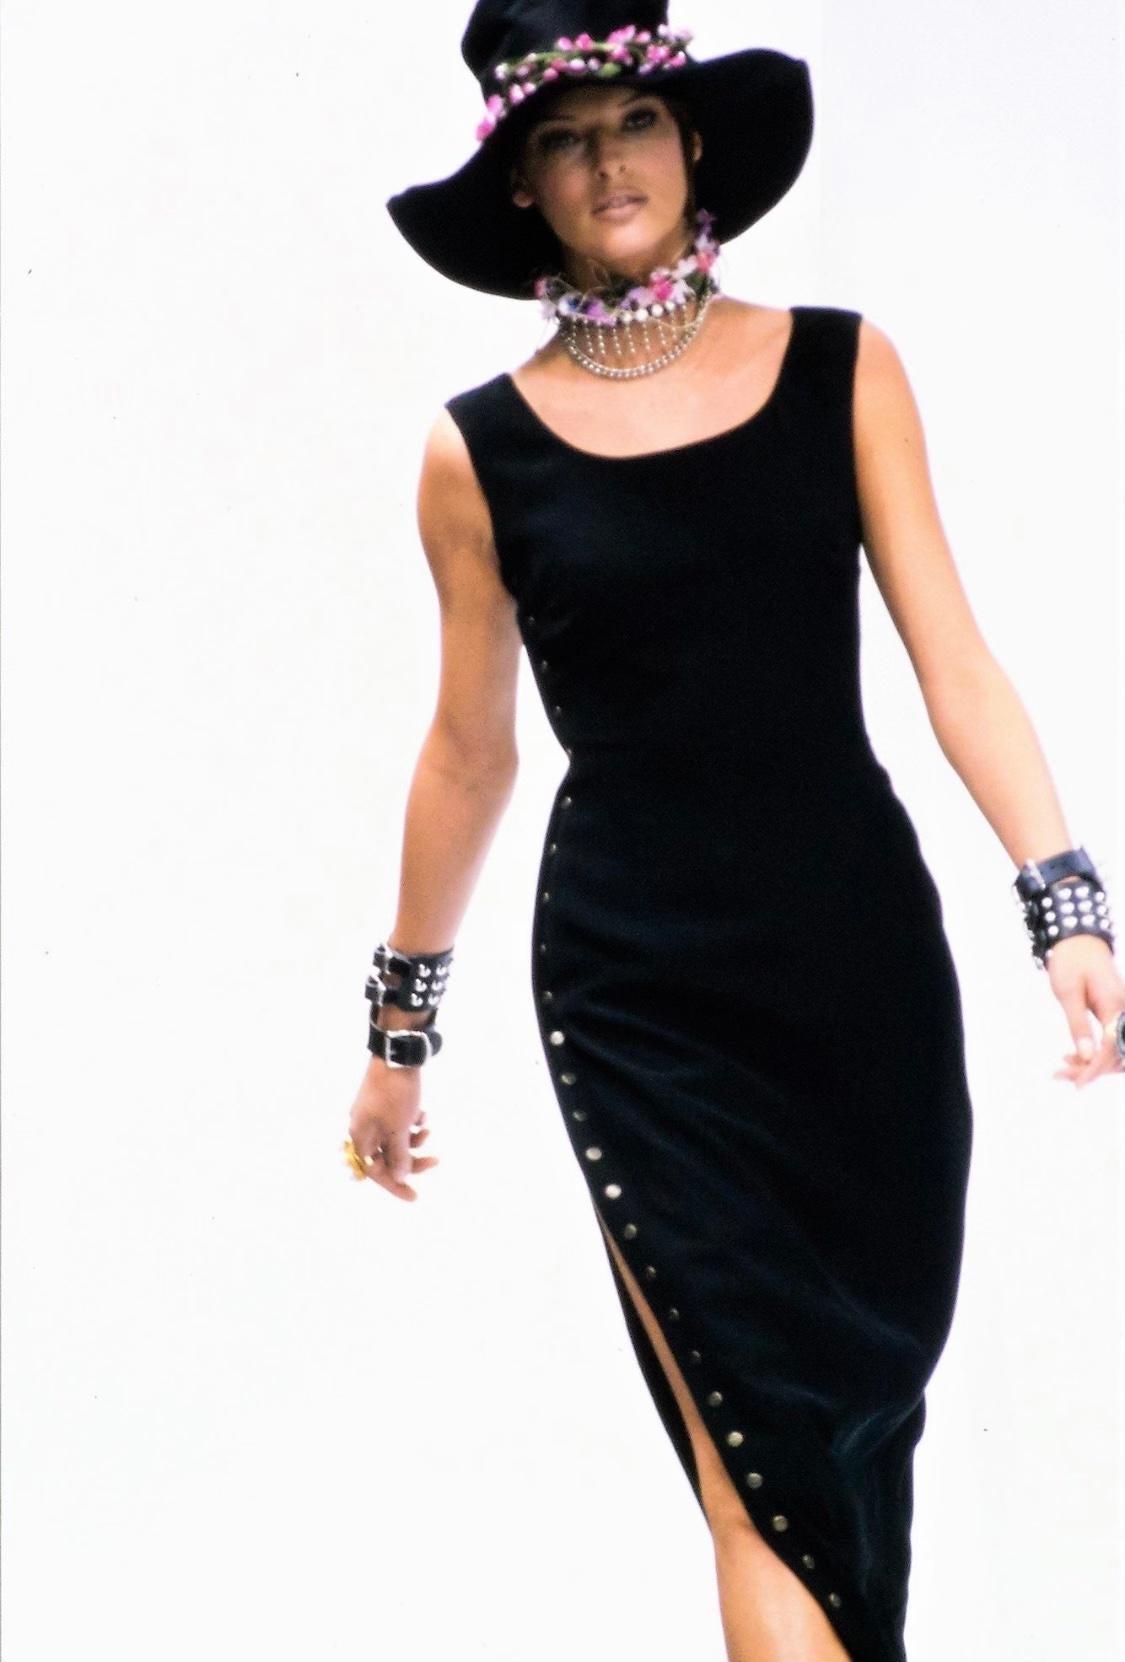 Presenting a black maxi dress designed by Dolce & Gabbana. From Spring/Summer 1993 collection this dress debuted on the season's runway as look 15 modeled by Linda Evangelista. Snap closures with the 'D&G' logo run the length of the dress and are